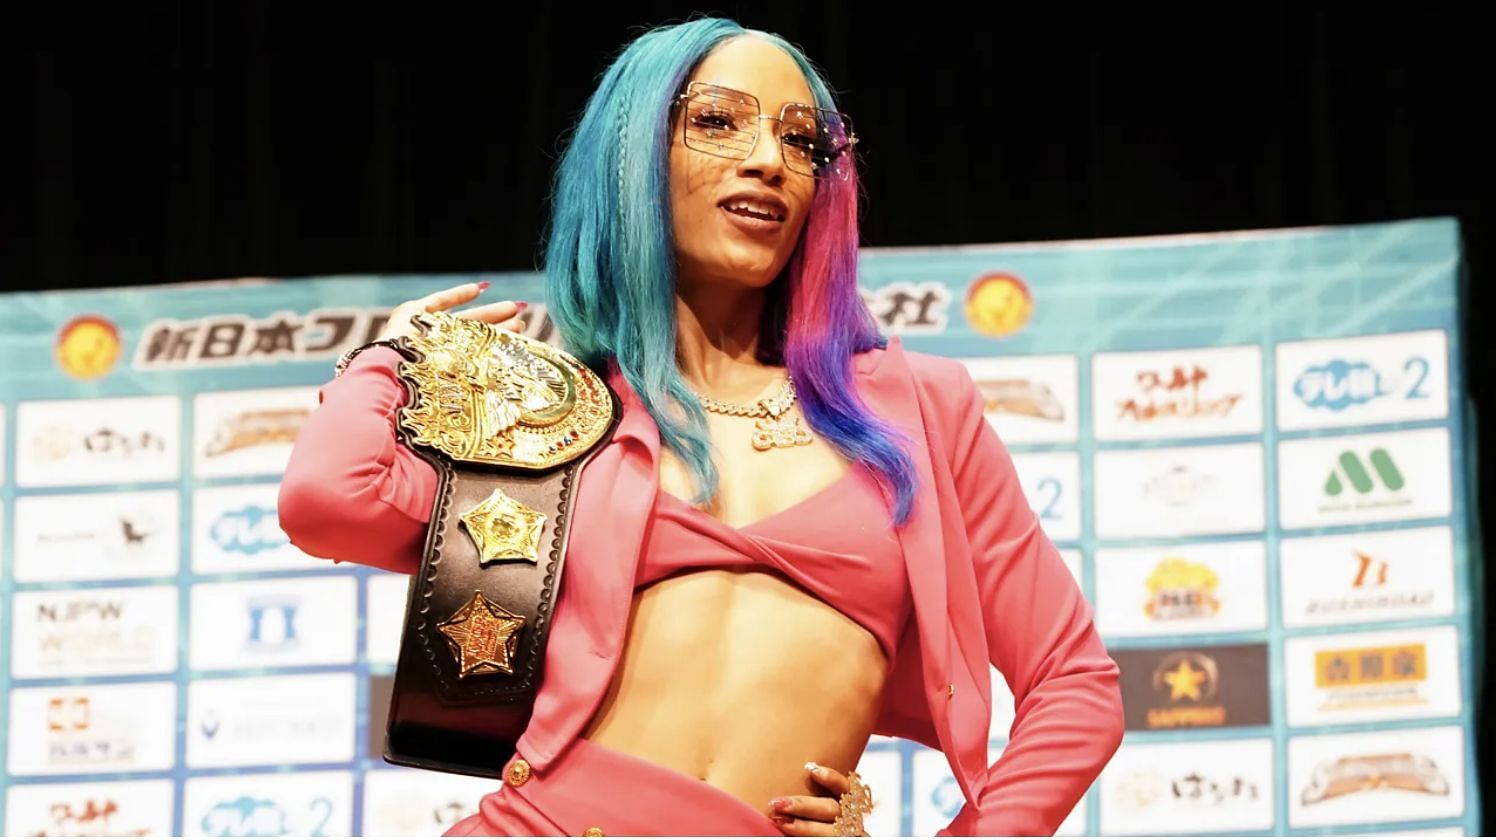 The former Sasha Banks is wrestling in Japan these days